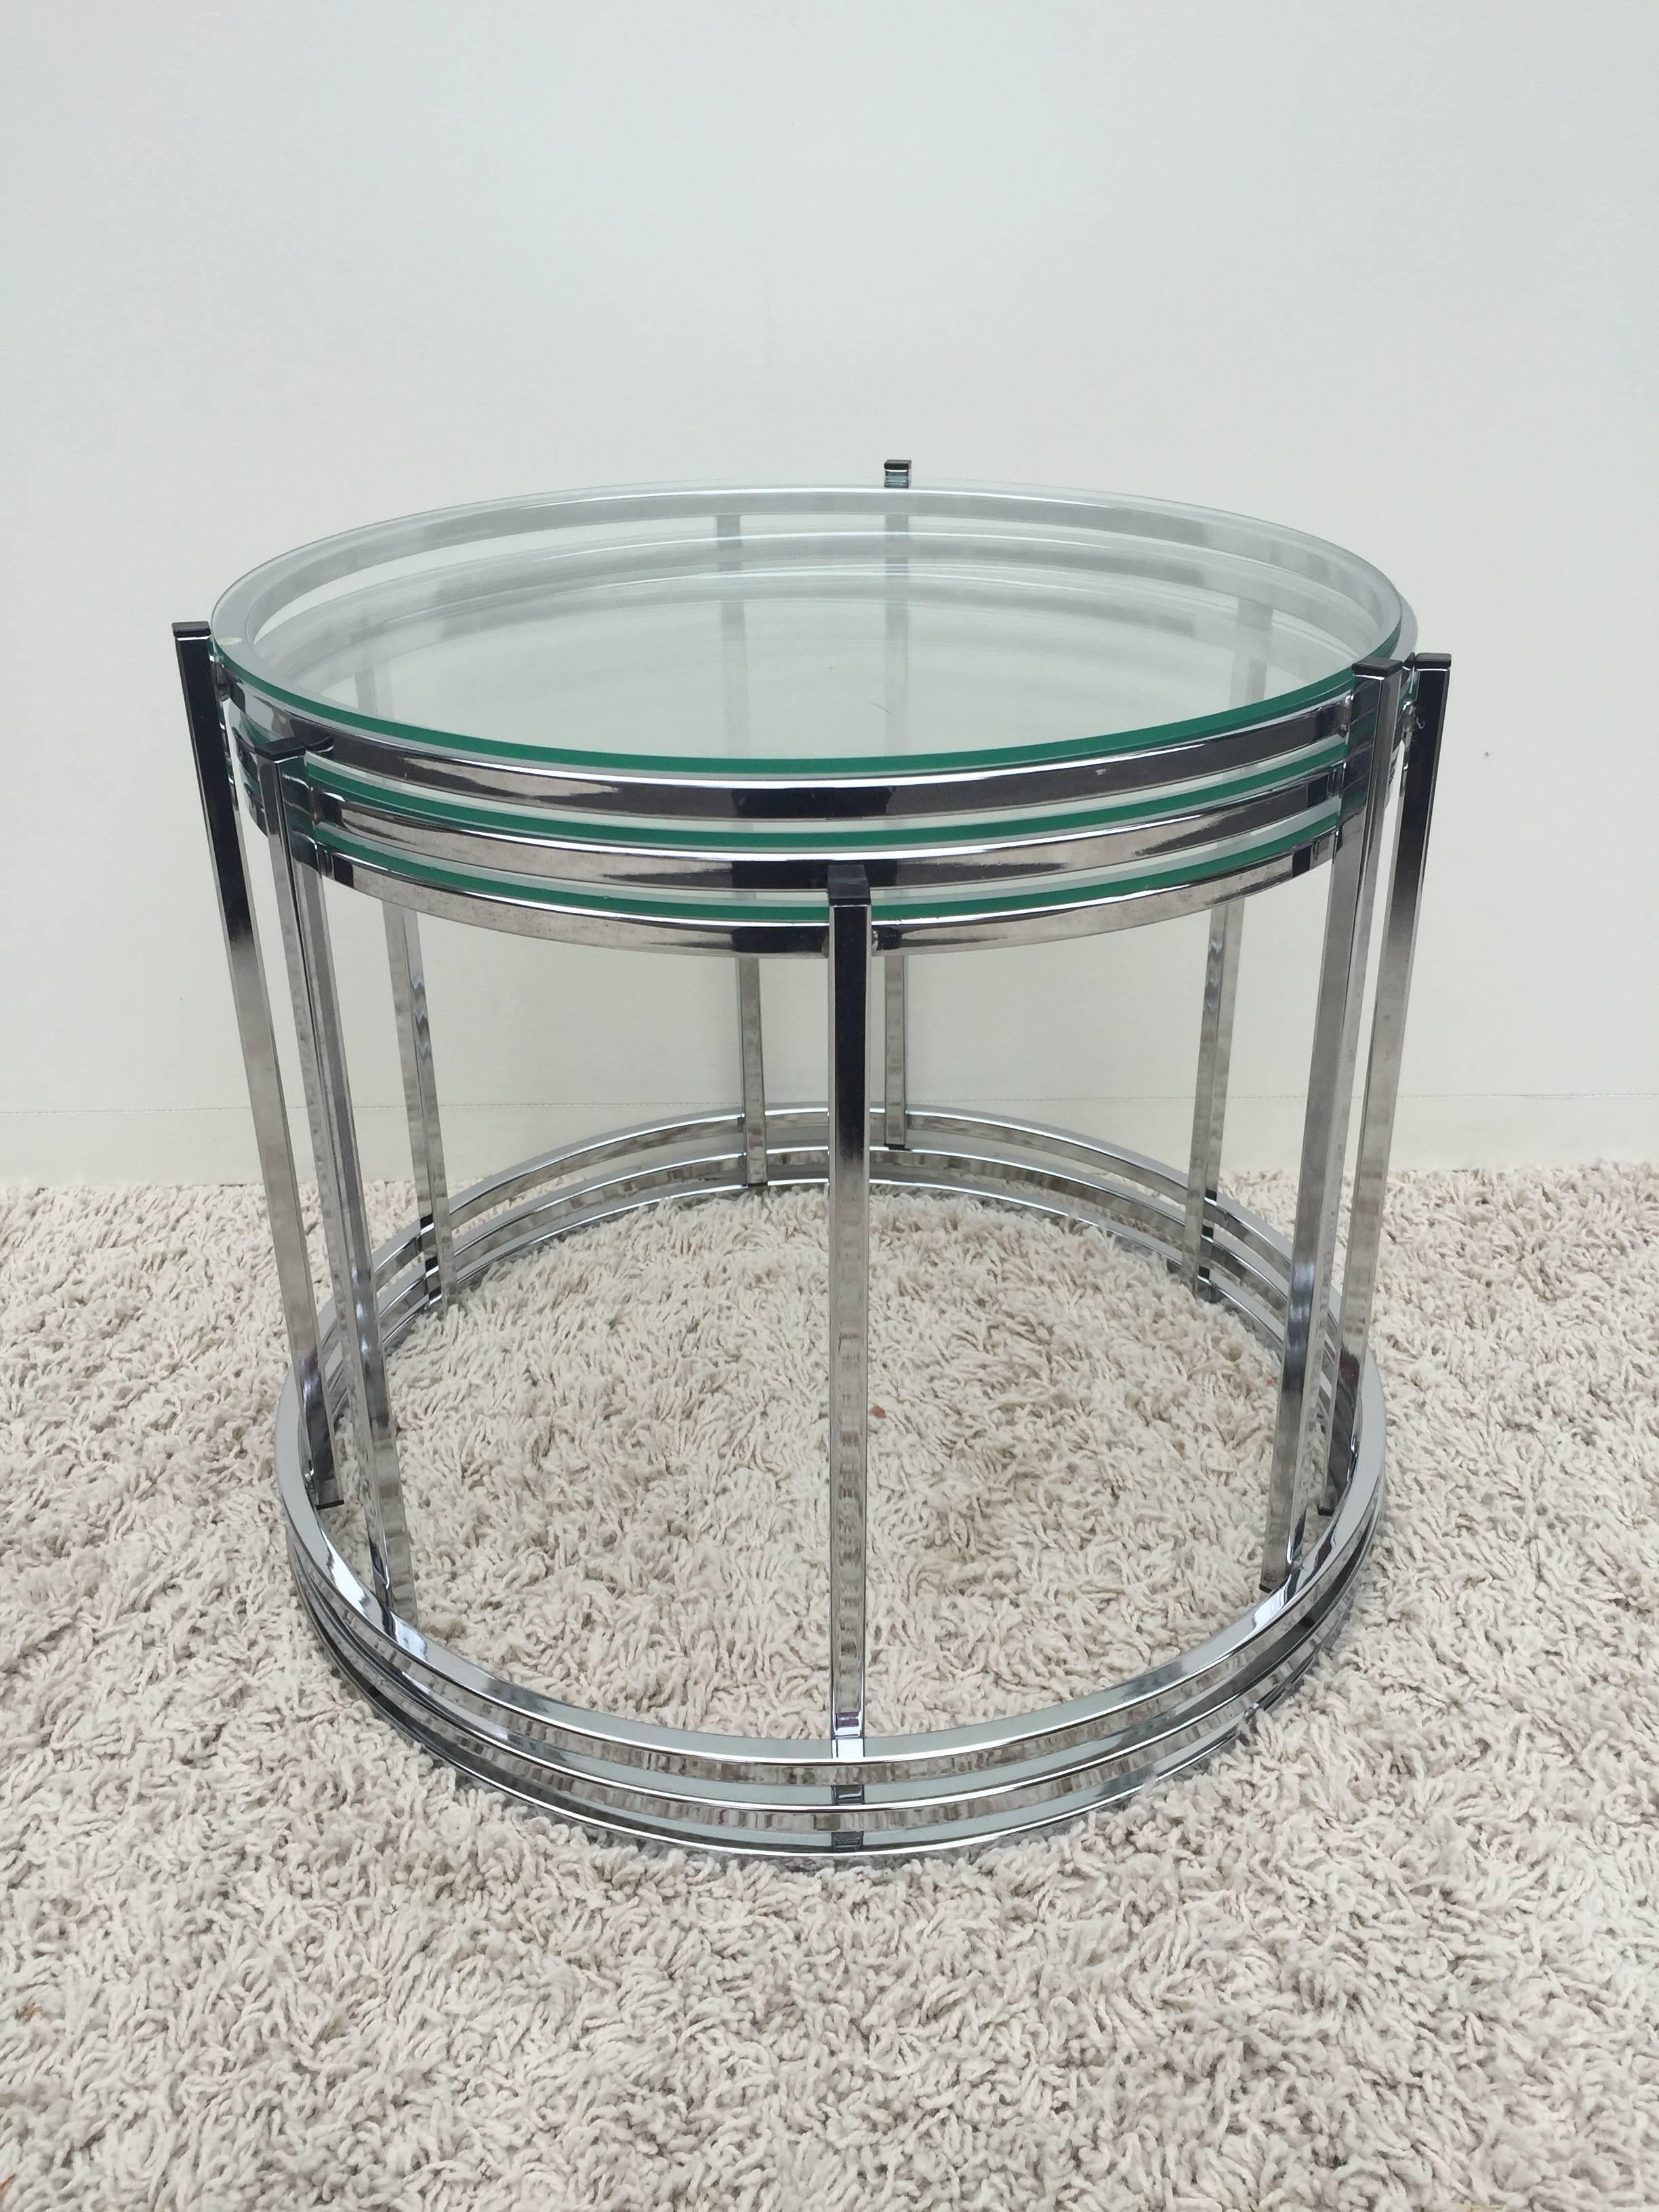 Milo Baughman style chrome glass stacking/nesting side tables, versatile design, great for serving and cluster tables.